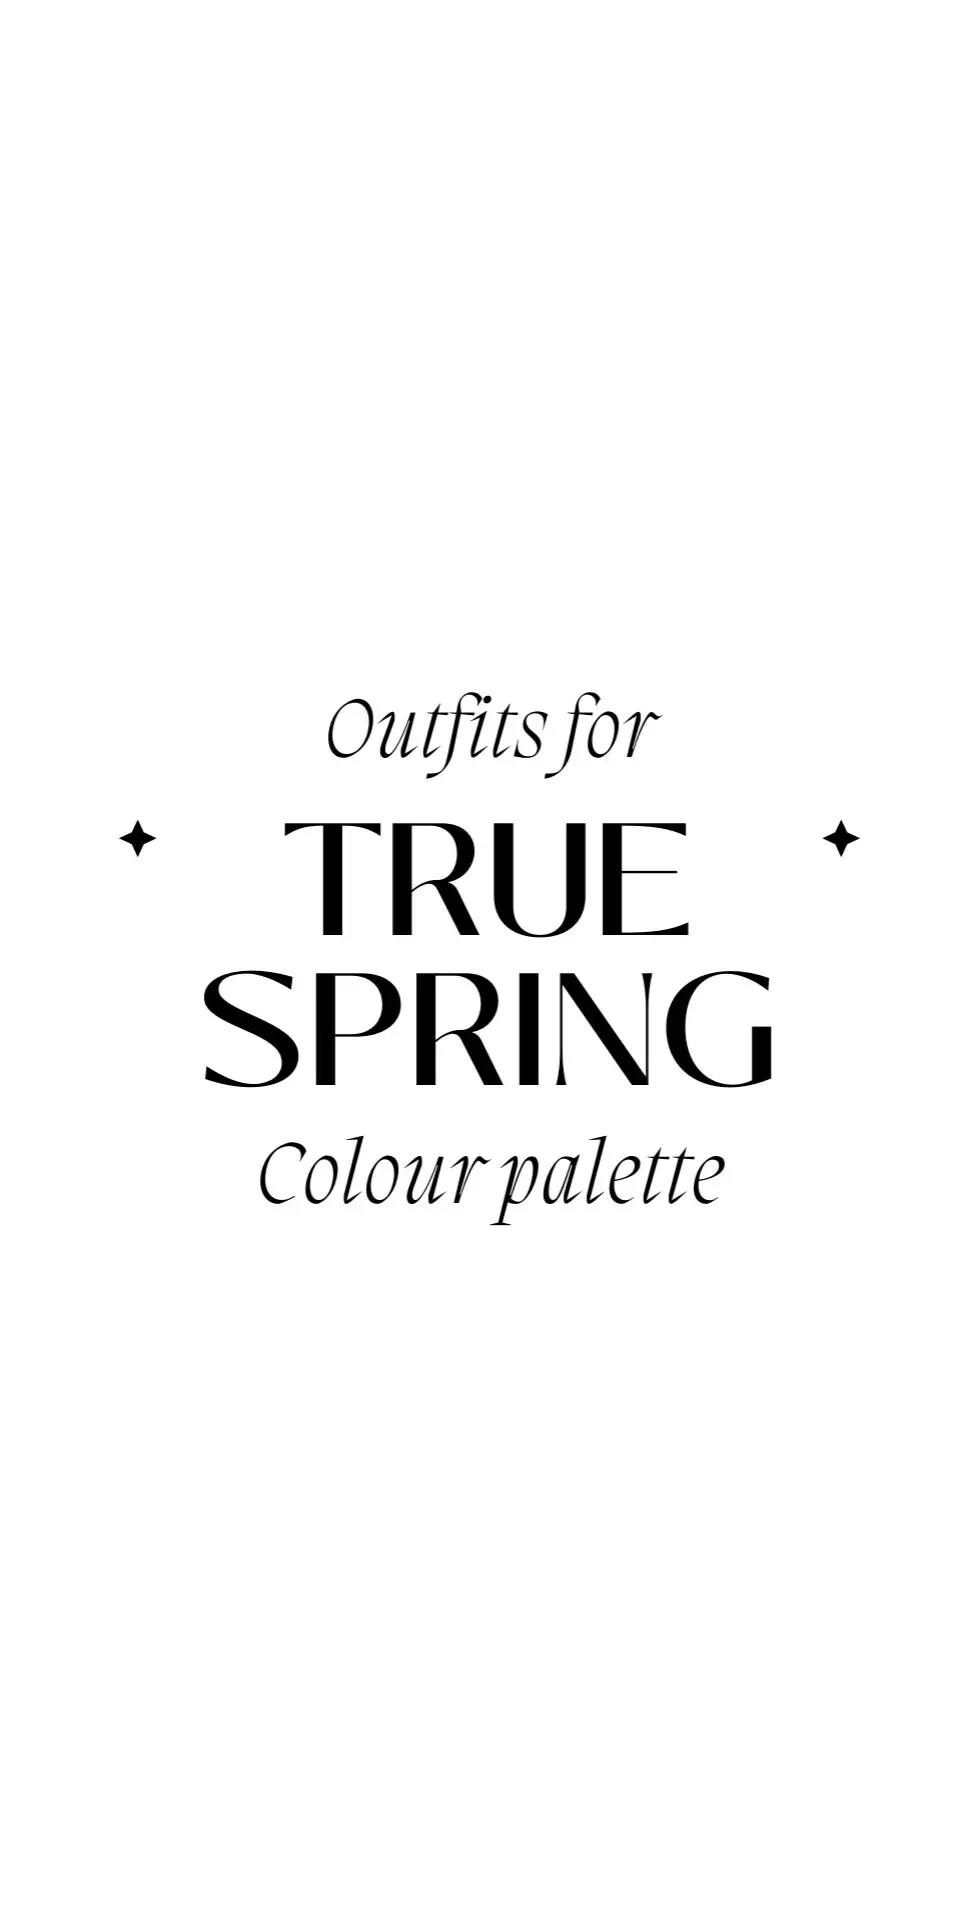 outfit inspo for true spring seasonal palette 🌷🤍✨ - - #outfit #outfits #fashion #classyoutfits #fashiontiktok #outfitideas #oldmoneyoutfit #elegantfashion #style #styling #outfitinspo #classy #classyaesthetic #cleangirl #aesthetic #oldmoney #elegant #quietluxury #pinterestgirl #thatgirl #itgirl #moodboard #luxury #Lifestyle #inspo #elegance #classycasualoutfits 